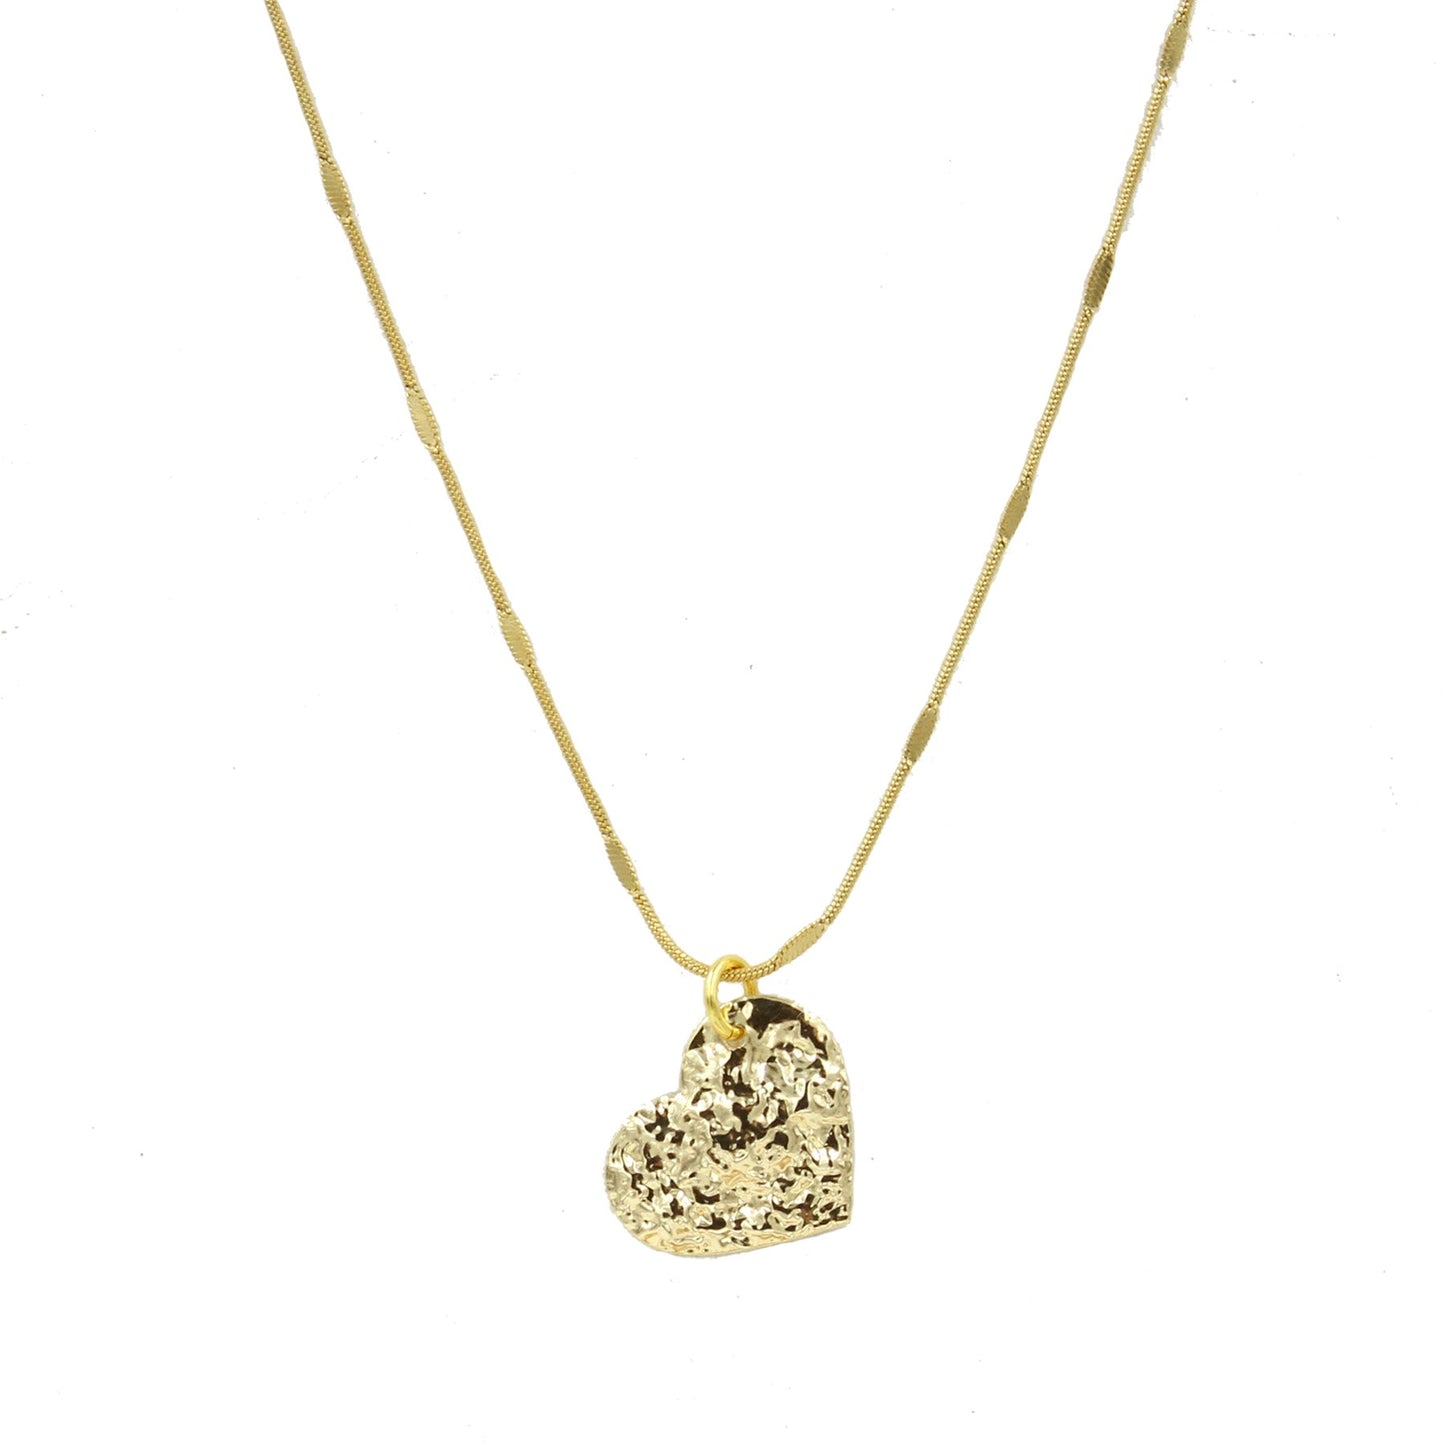 Hammered Heart Snake Chain Necklace - Sunday Girl by Amy DiLamarraNecklace